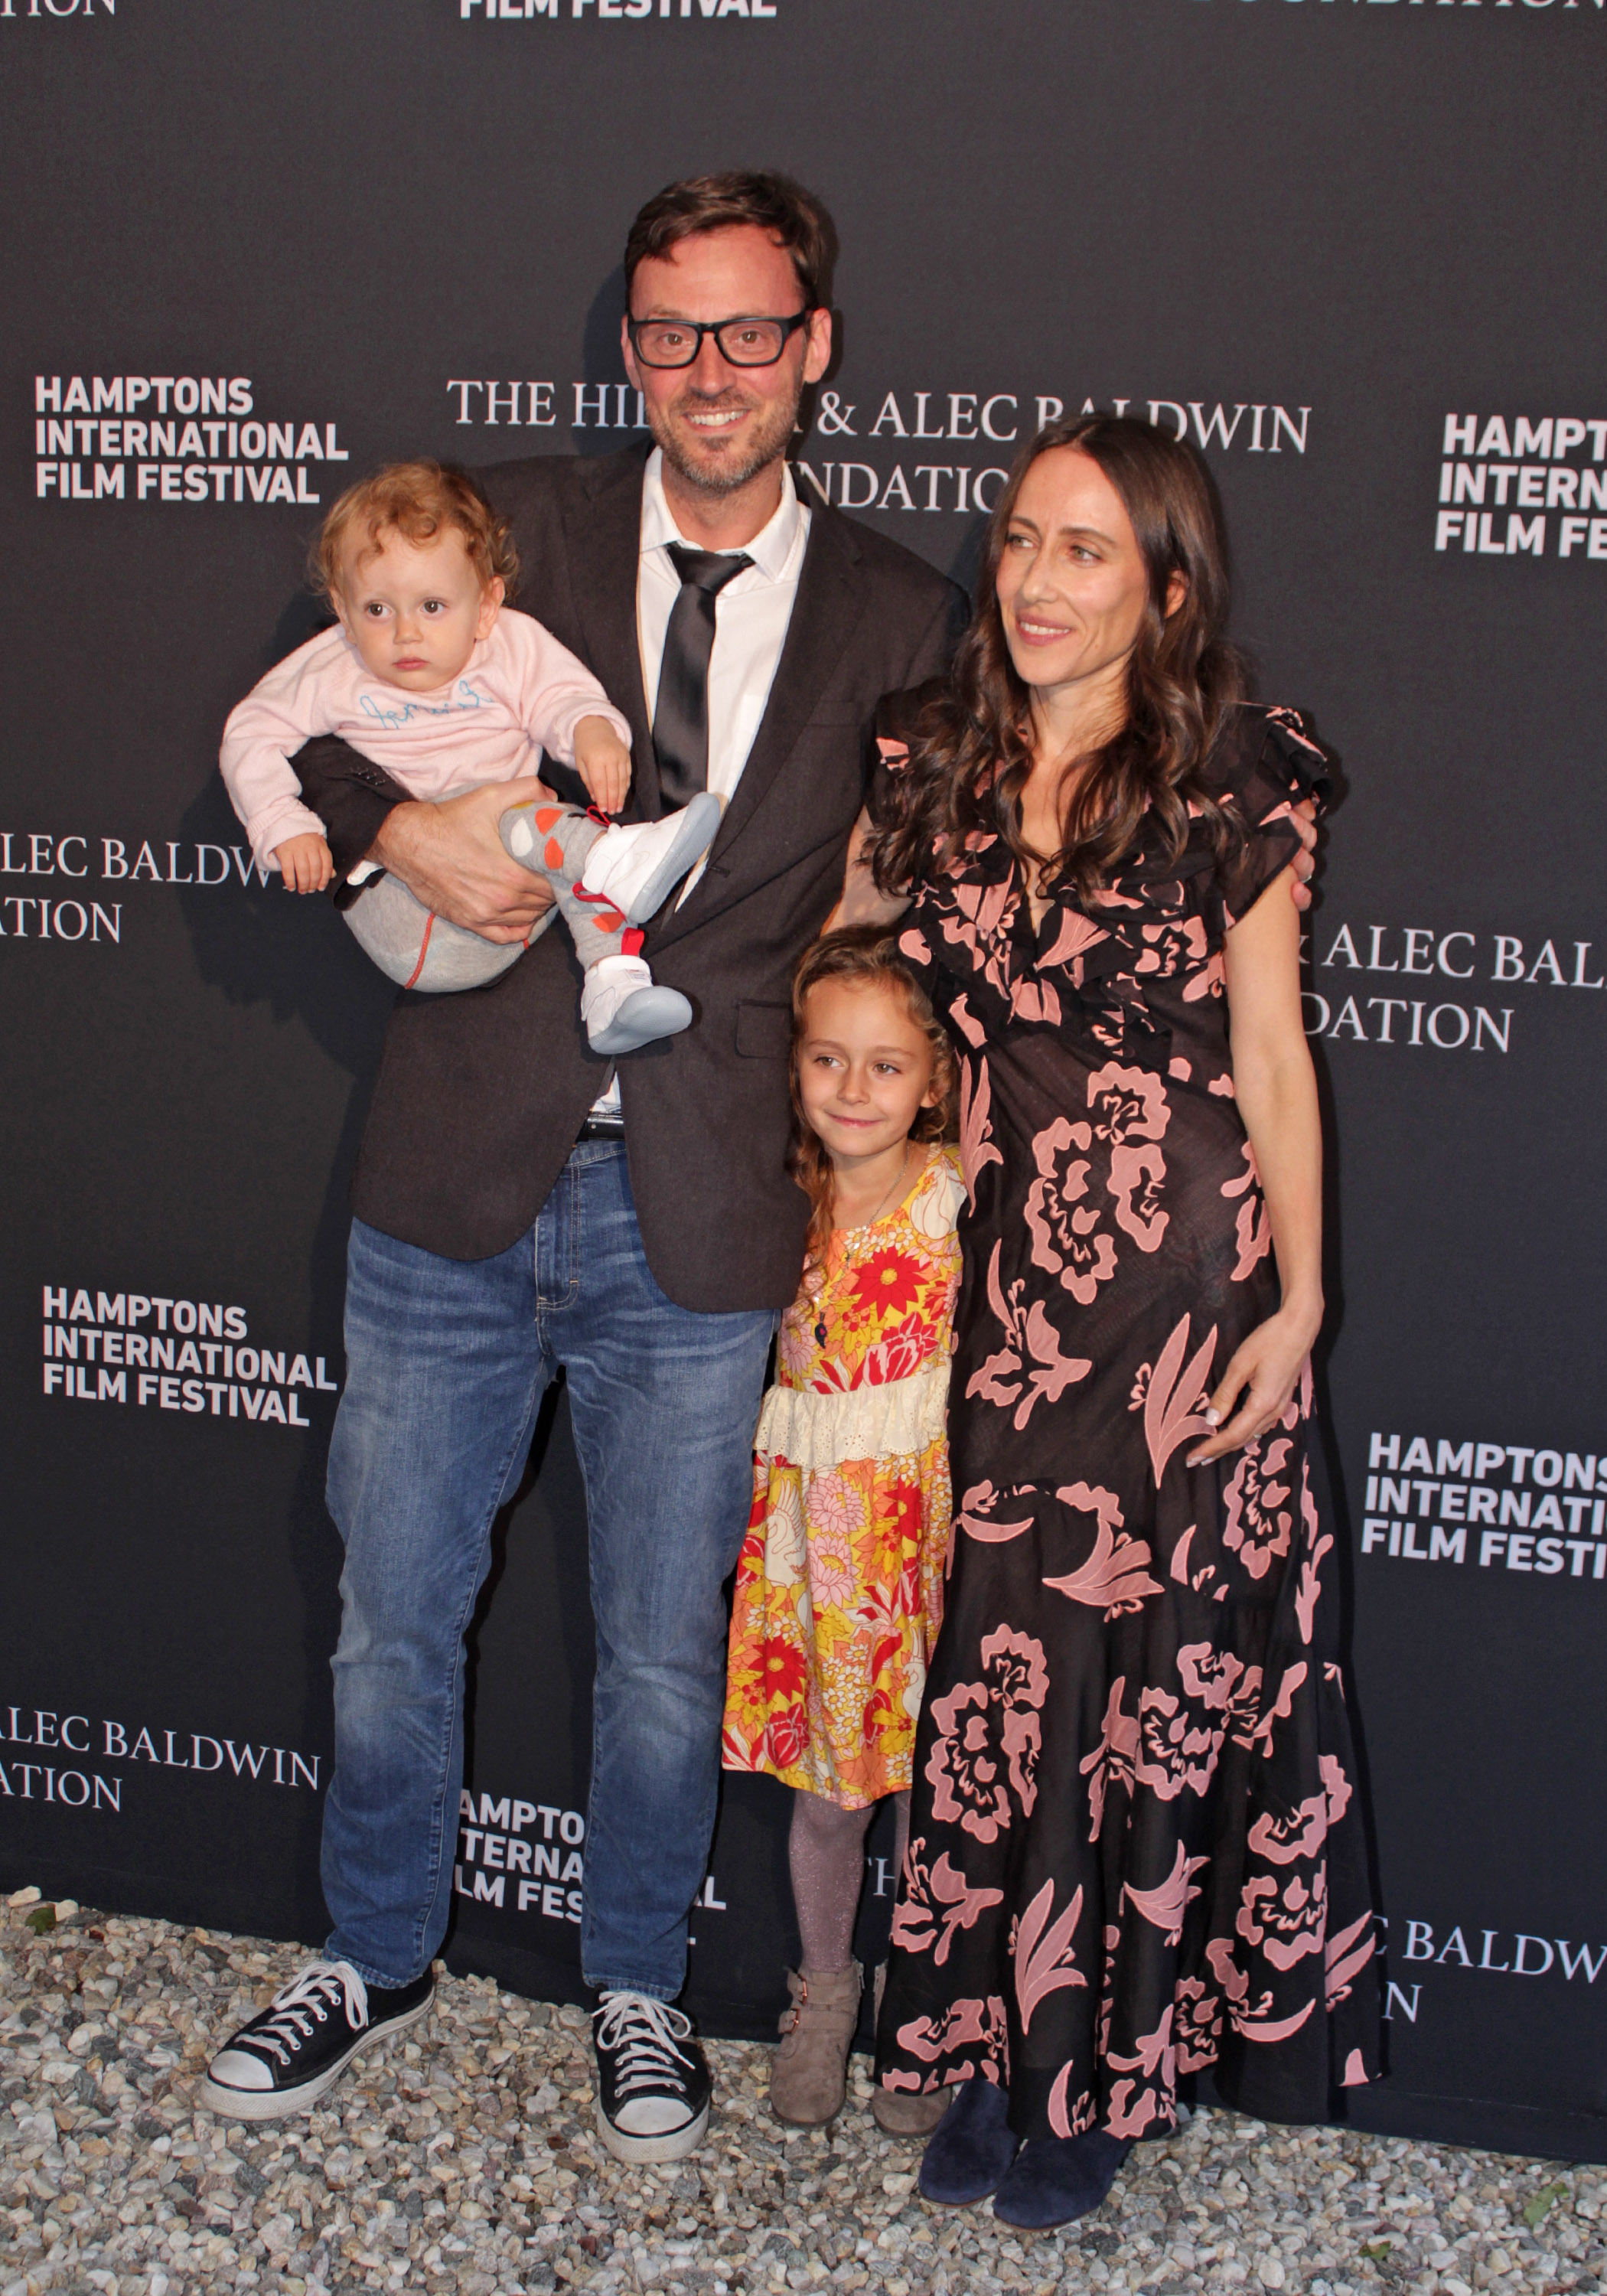 HIFF artistic director David Nugent with his wife Violet and their children.